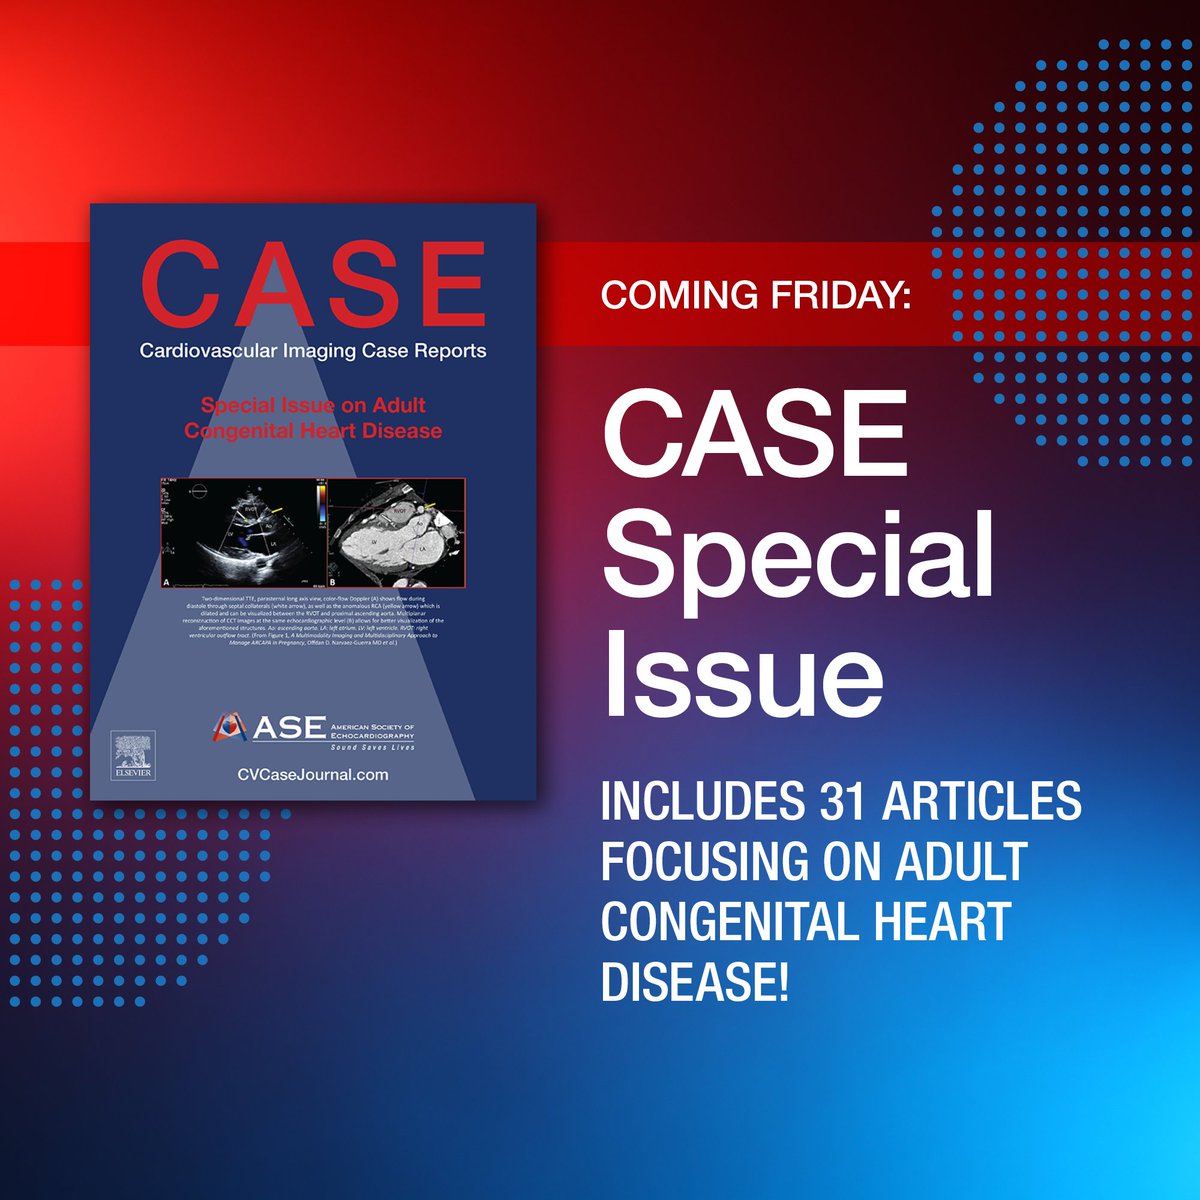 COMING FRIDAY: We will be releasing our #CASESpecialIssue, which will include 31 ARTICLES focusing on adult congenital heart disease! #ACHD🫀 Get ready for #10DaysofCASE from March 8-17!